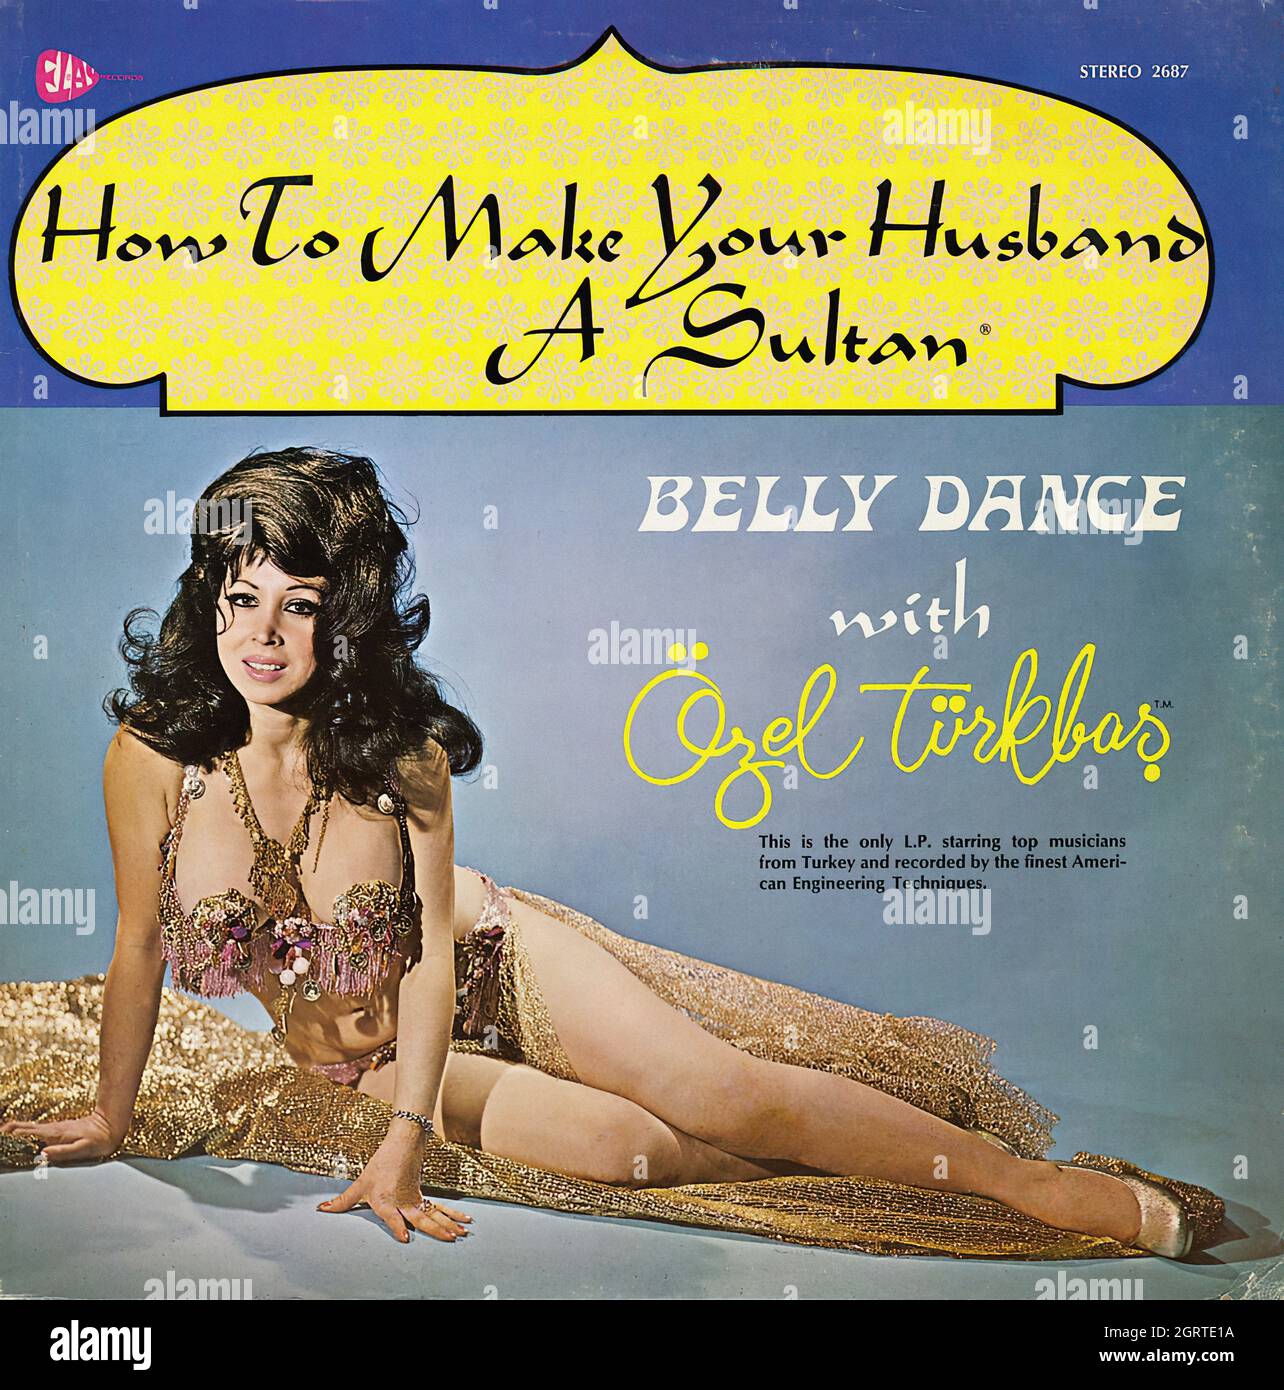 How To Make Your Husband A Sultan Belly Dance - Vintage Vinyl Album Stock Photo